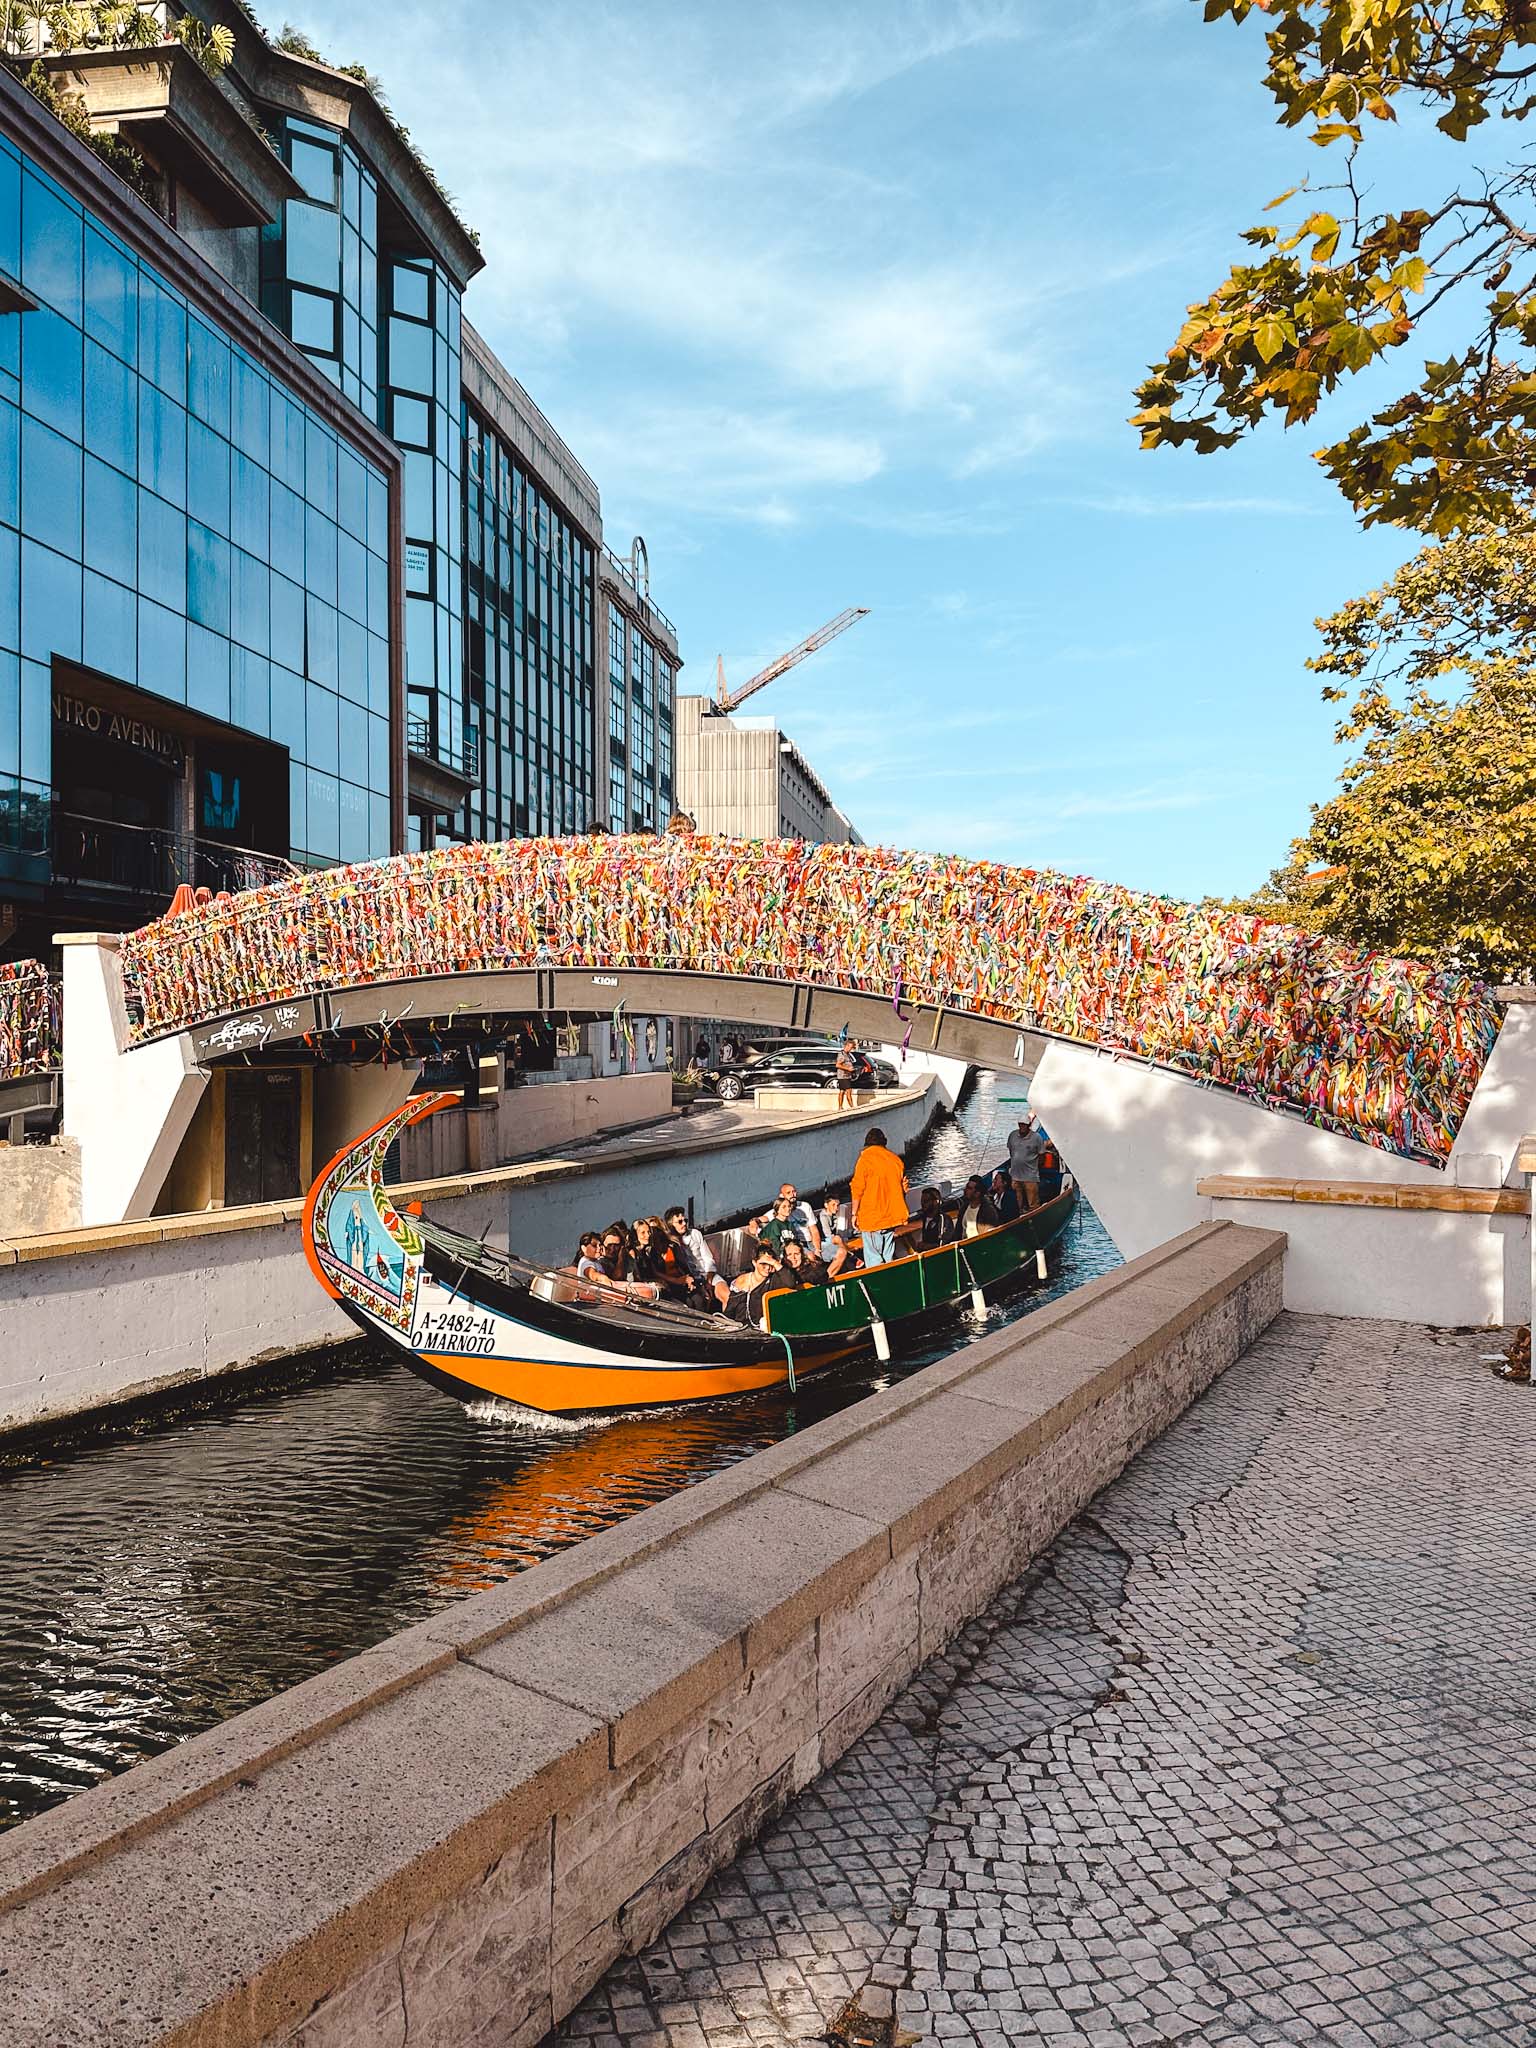 Best things to do in Aveiro, Portugal - friendship bridge with colorful ribbons